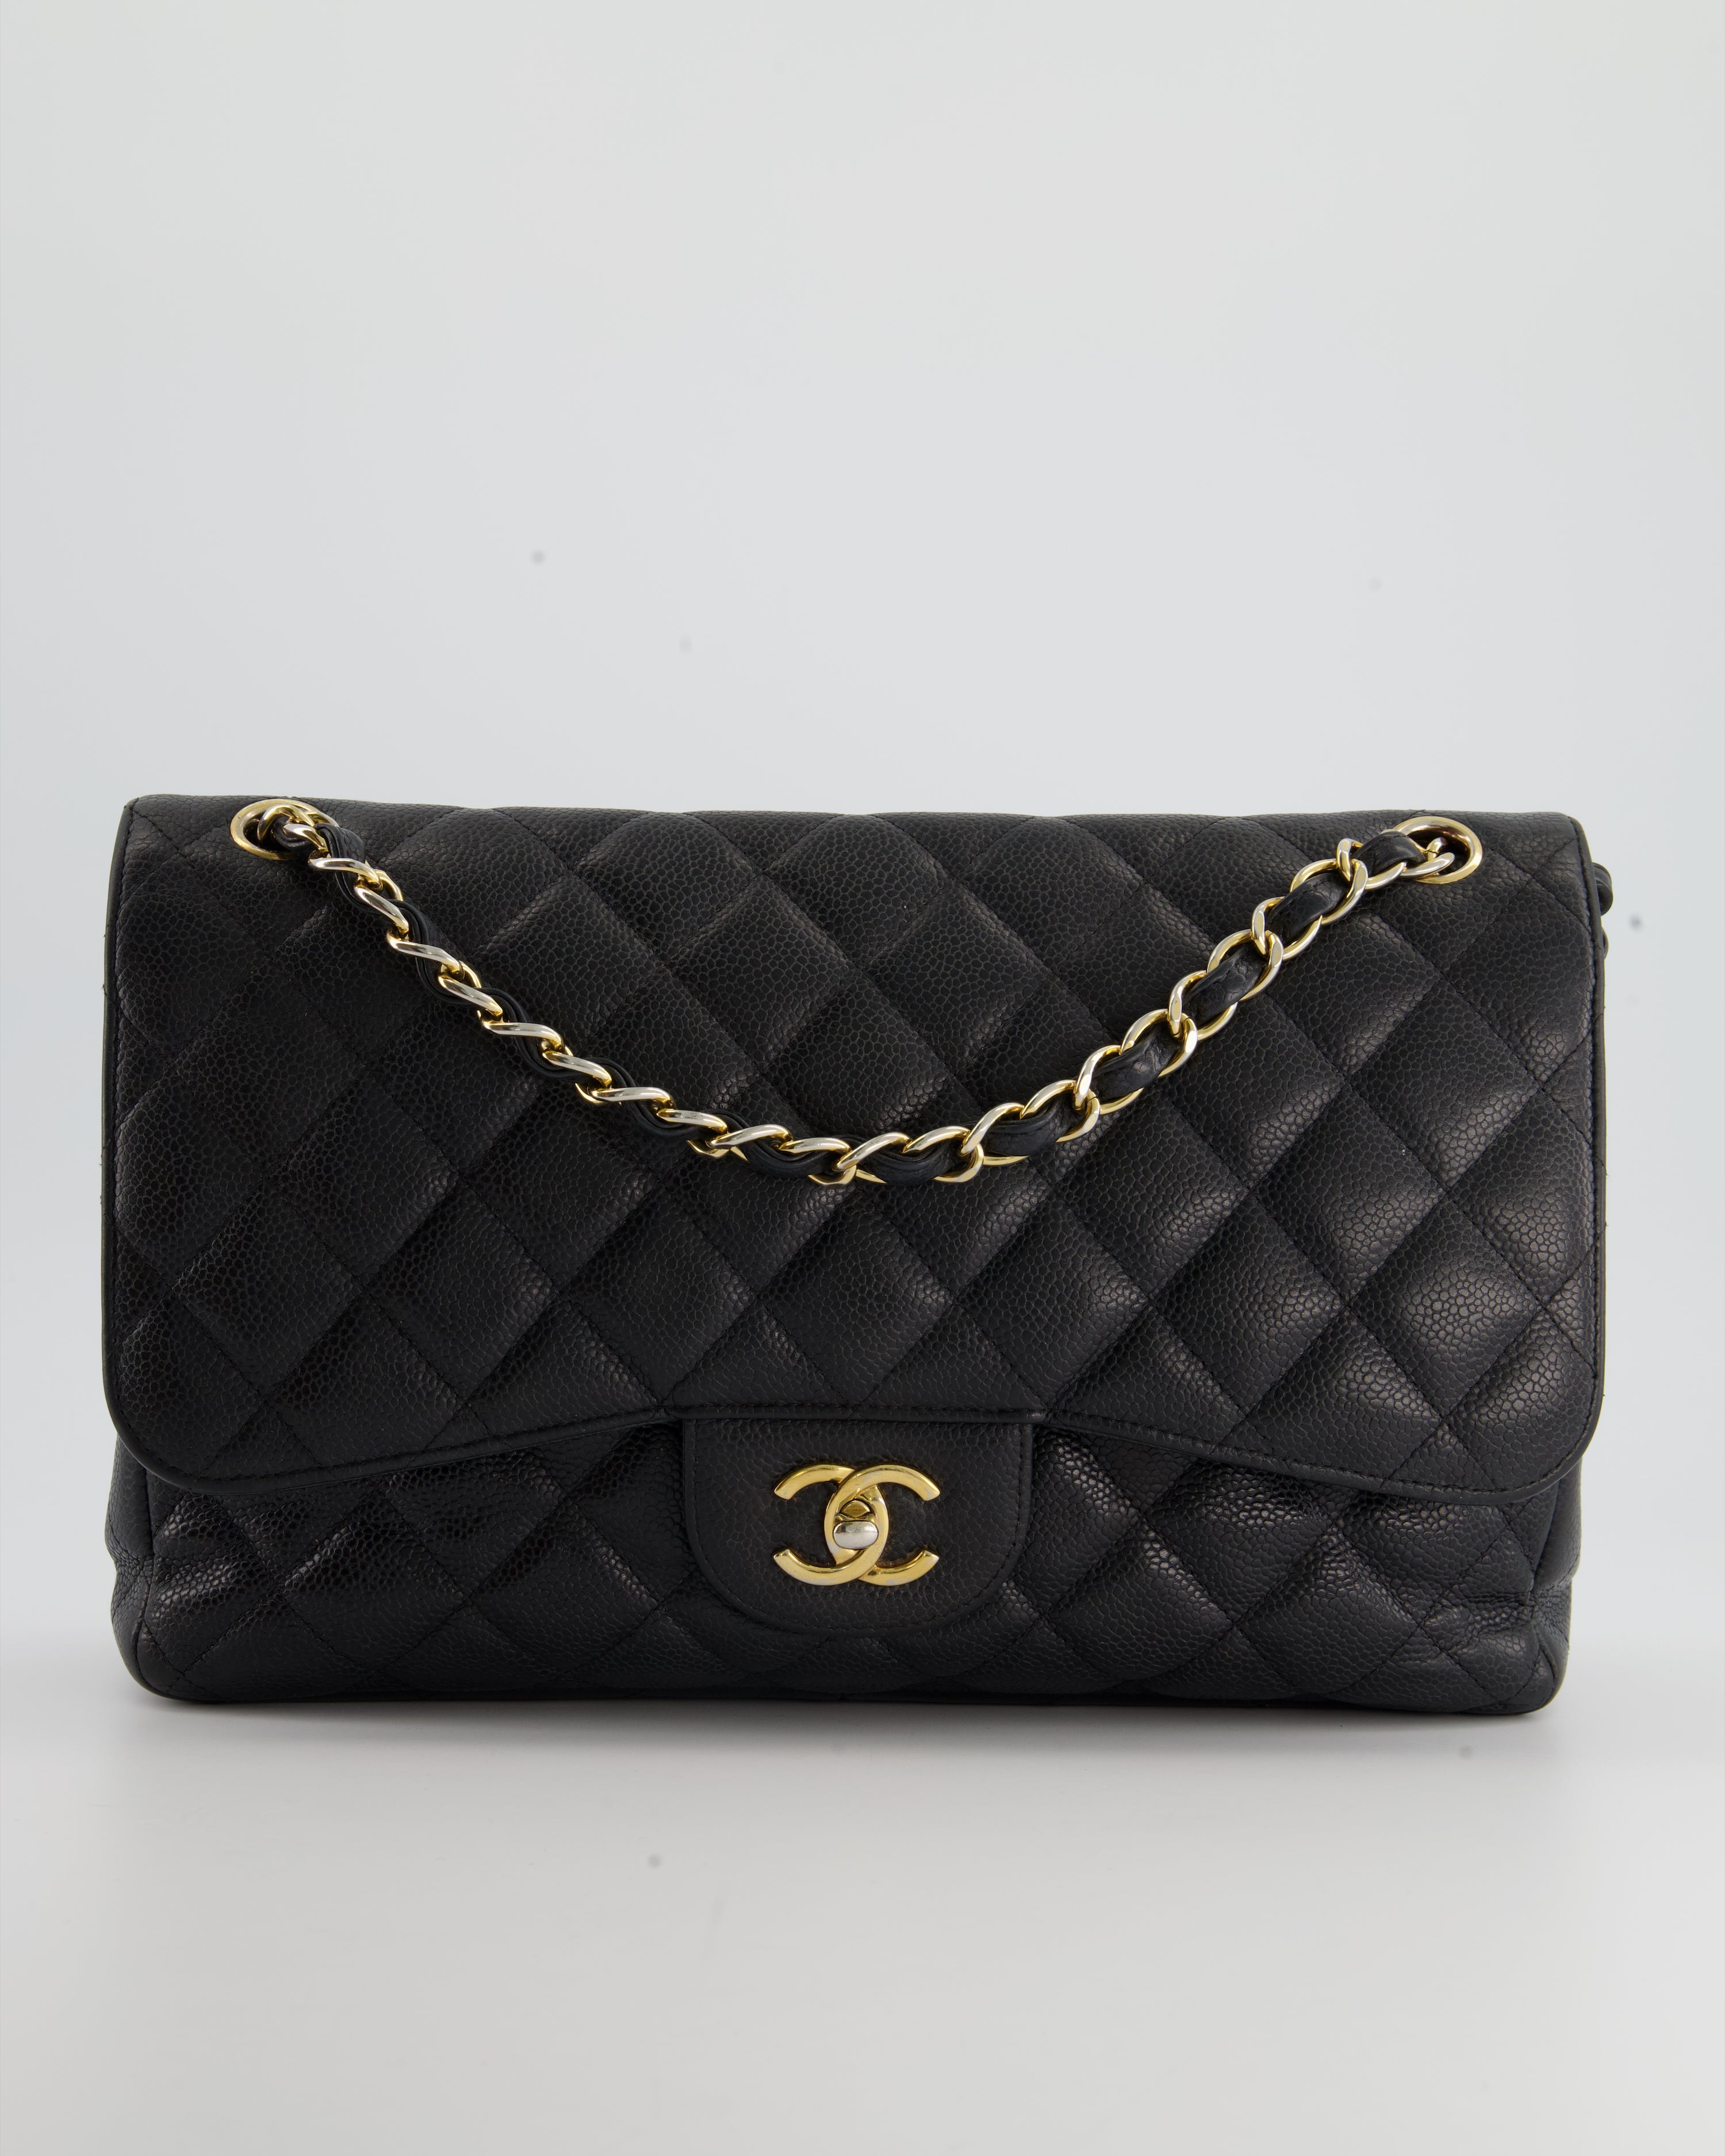 Chanel Black Caviar Jumbo Classic Double Flap Bag with Gold